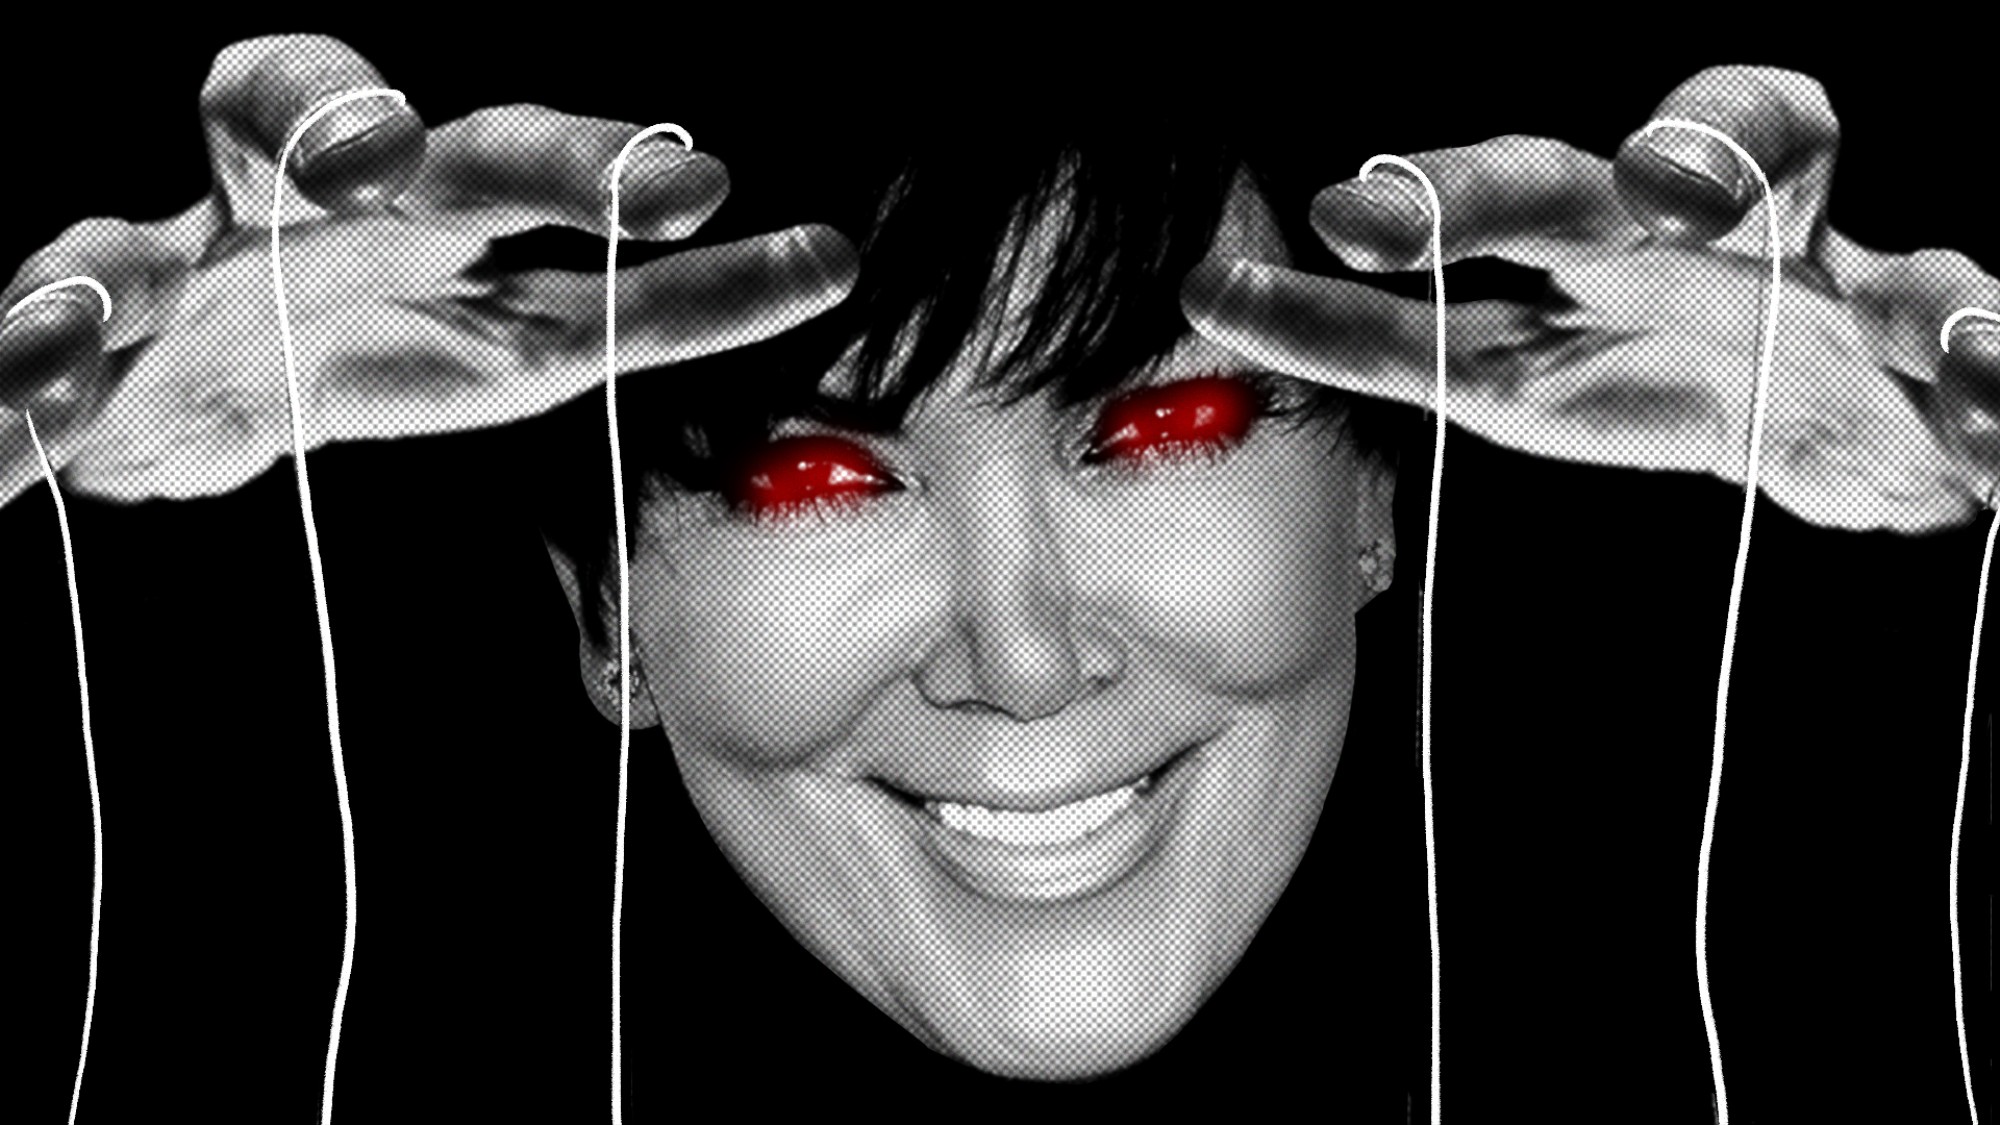 Kris Jenner Is Frequently Compared To The Devil And She Seems To